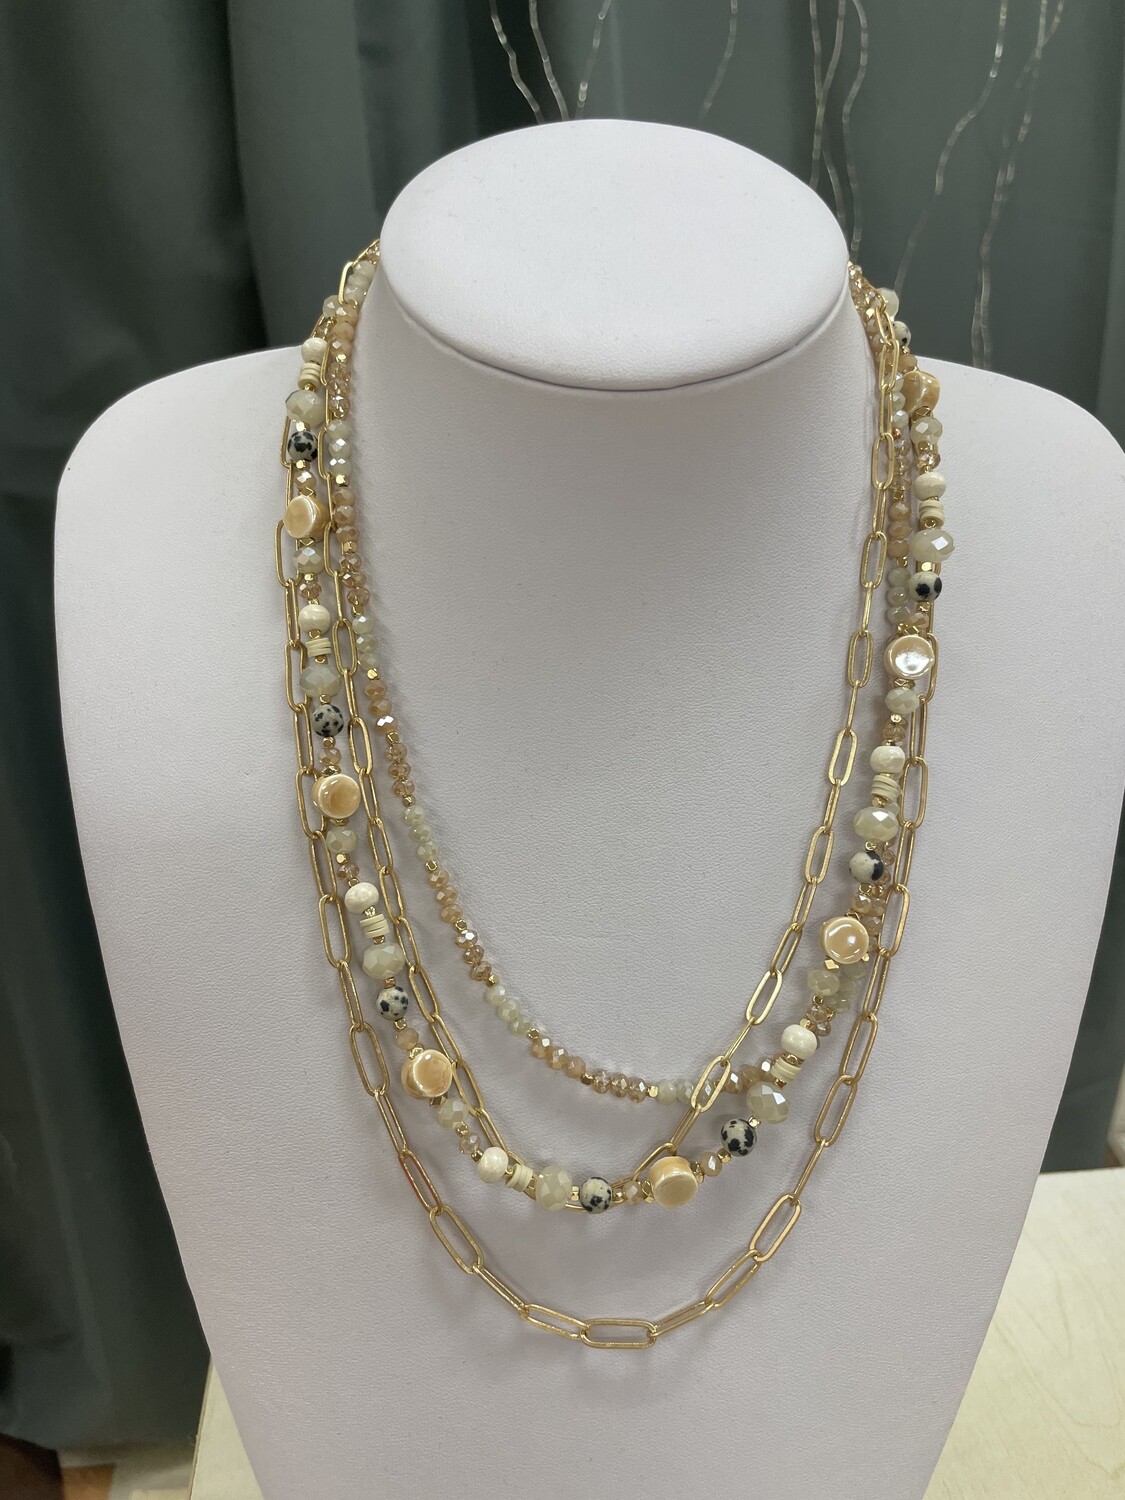 Four Layer Necklace Gold Chain Beaded Tan